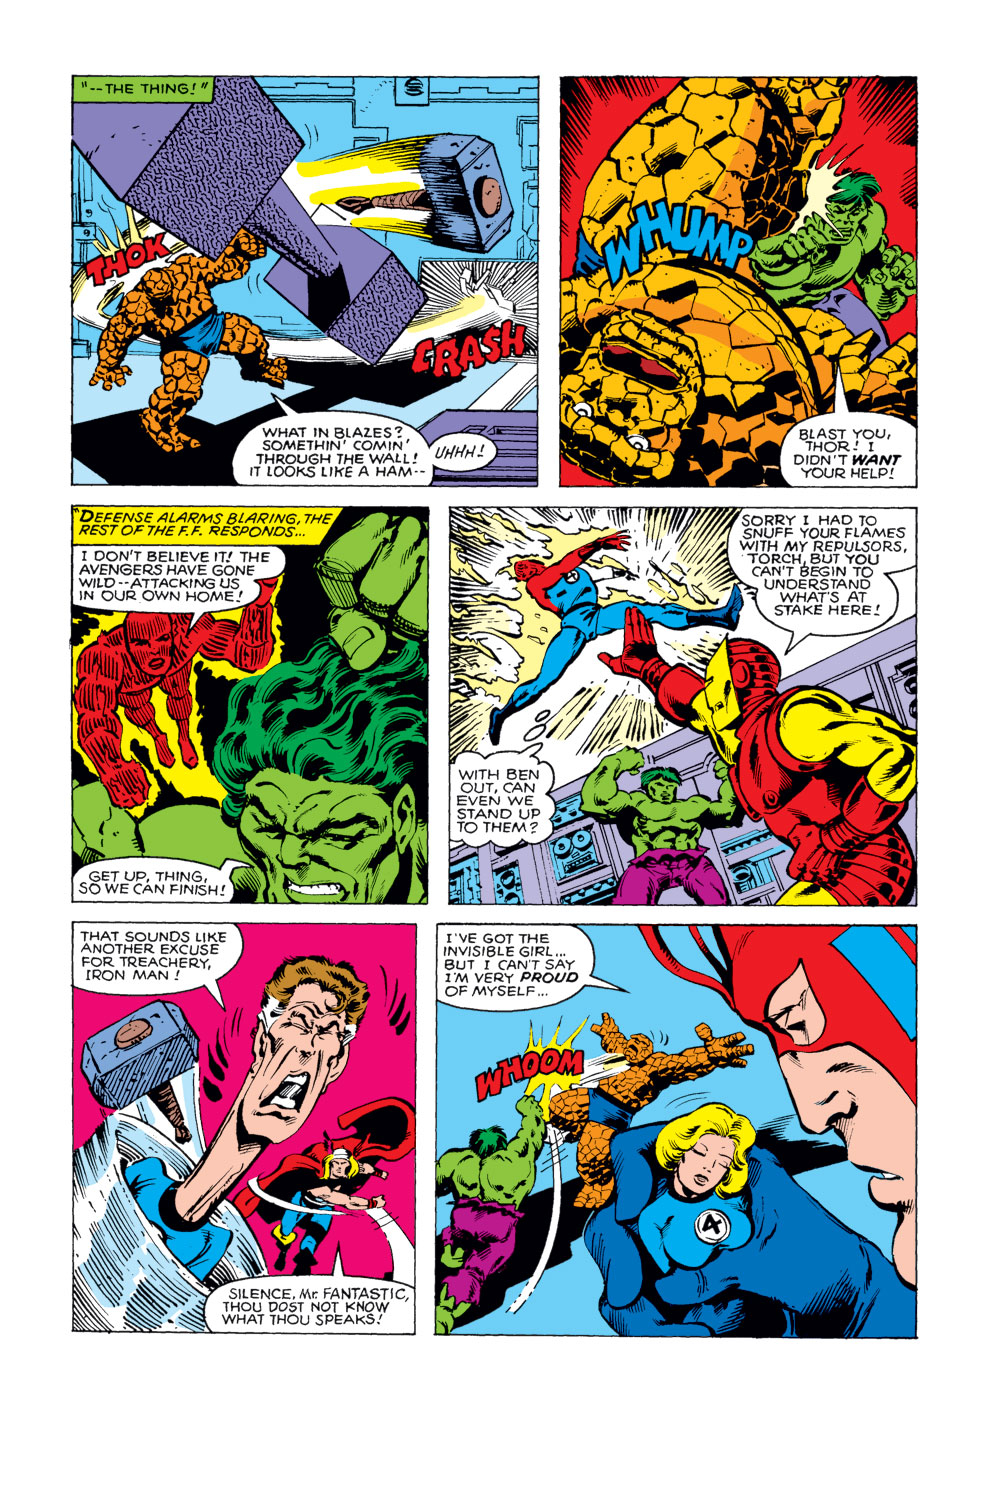 What If? (1977) issue 29 - The Avengers defeated everybody - Page 5